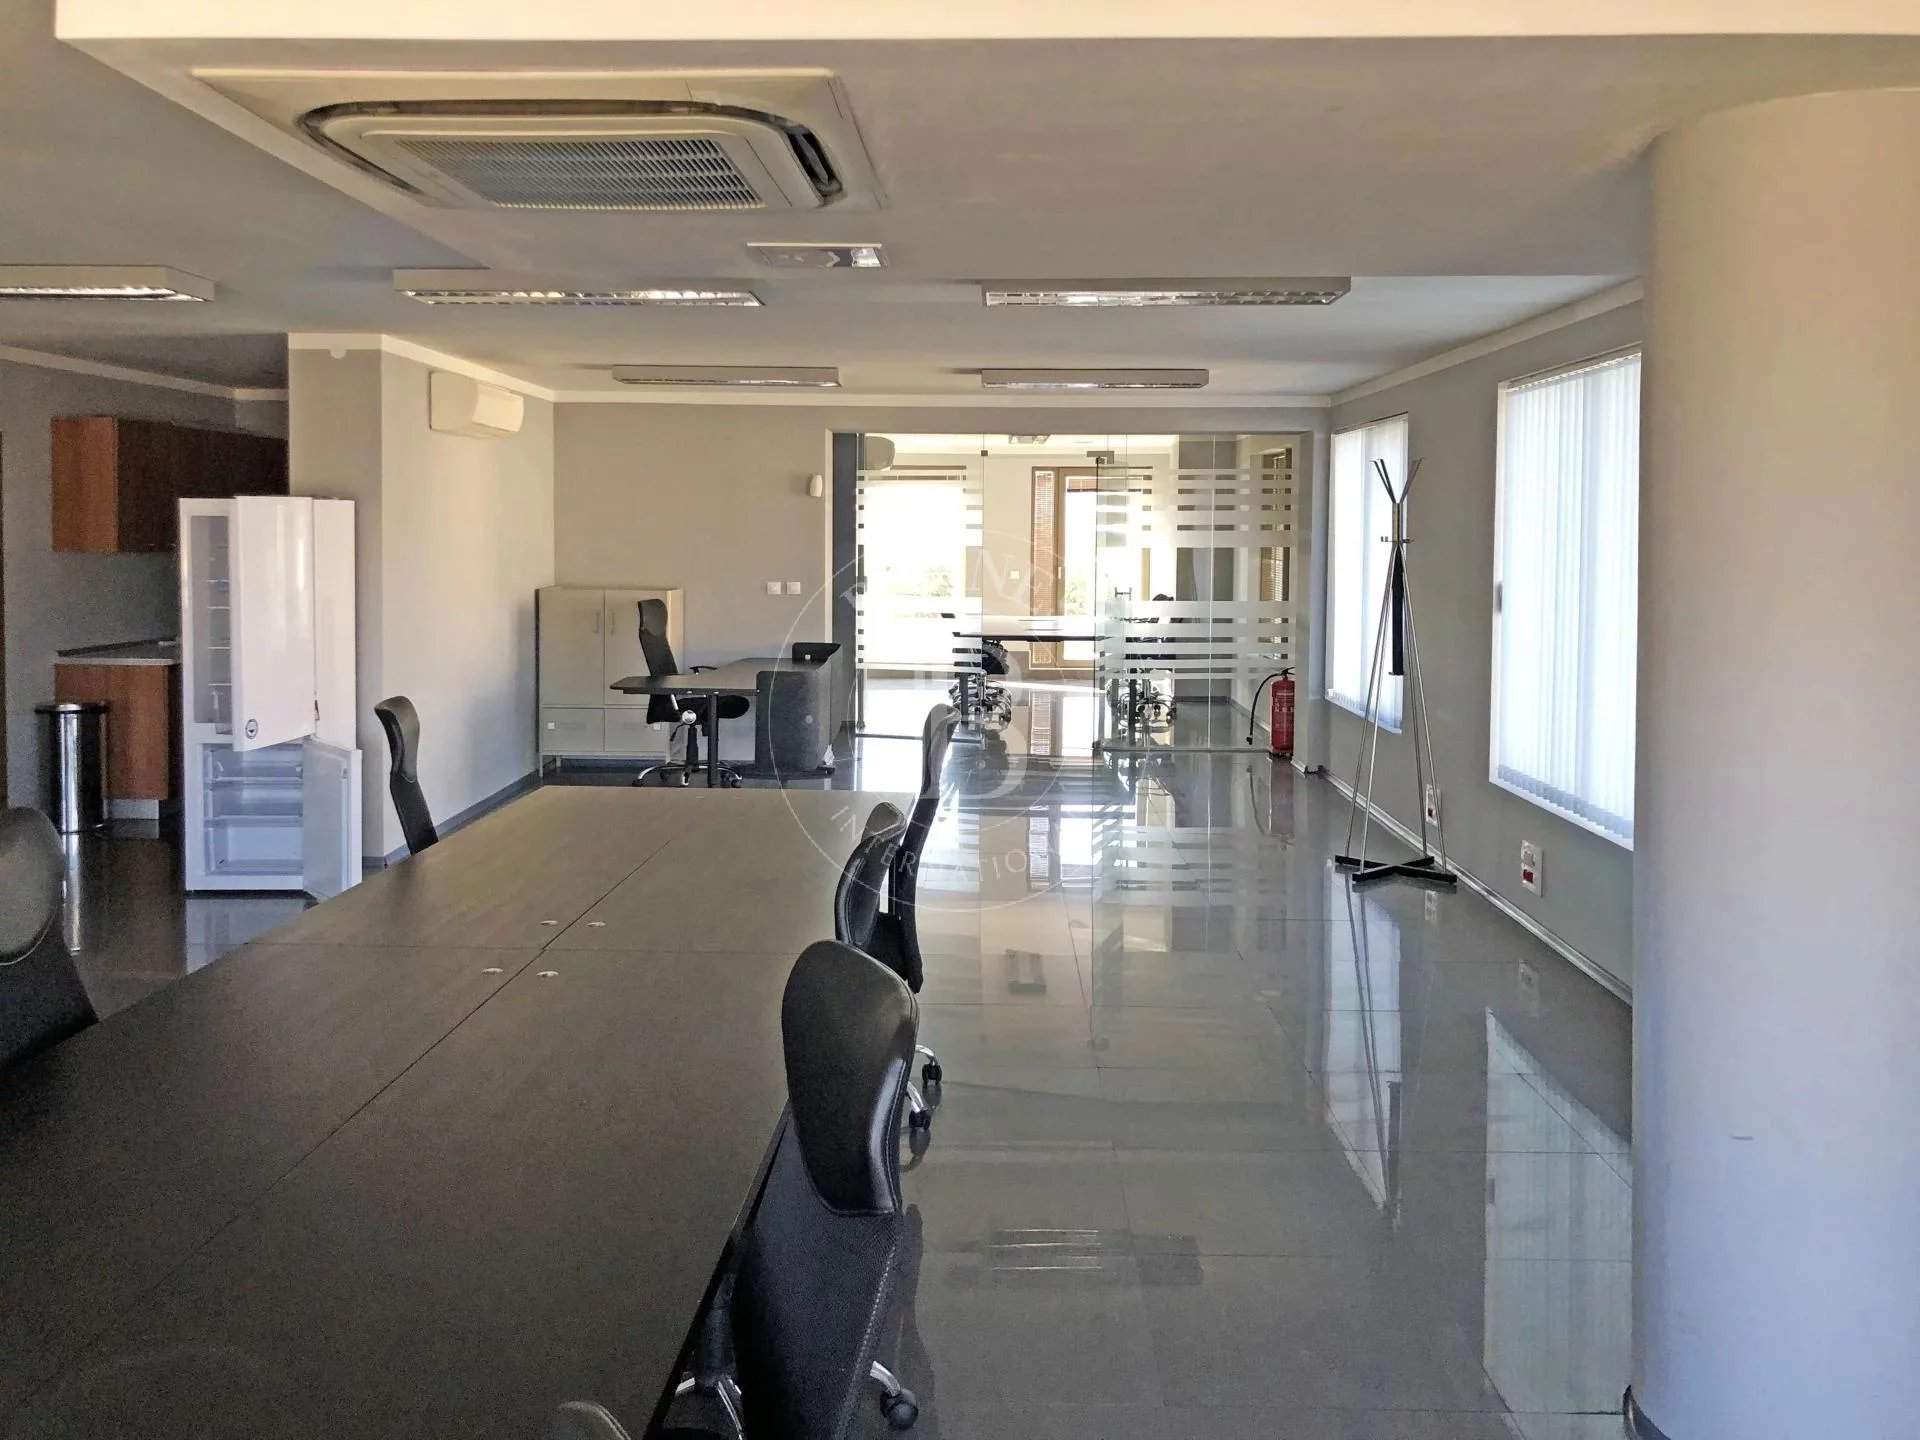 Sofia  - Offices  - picture 5